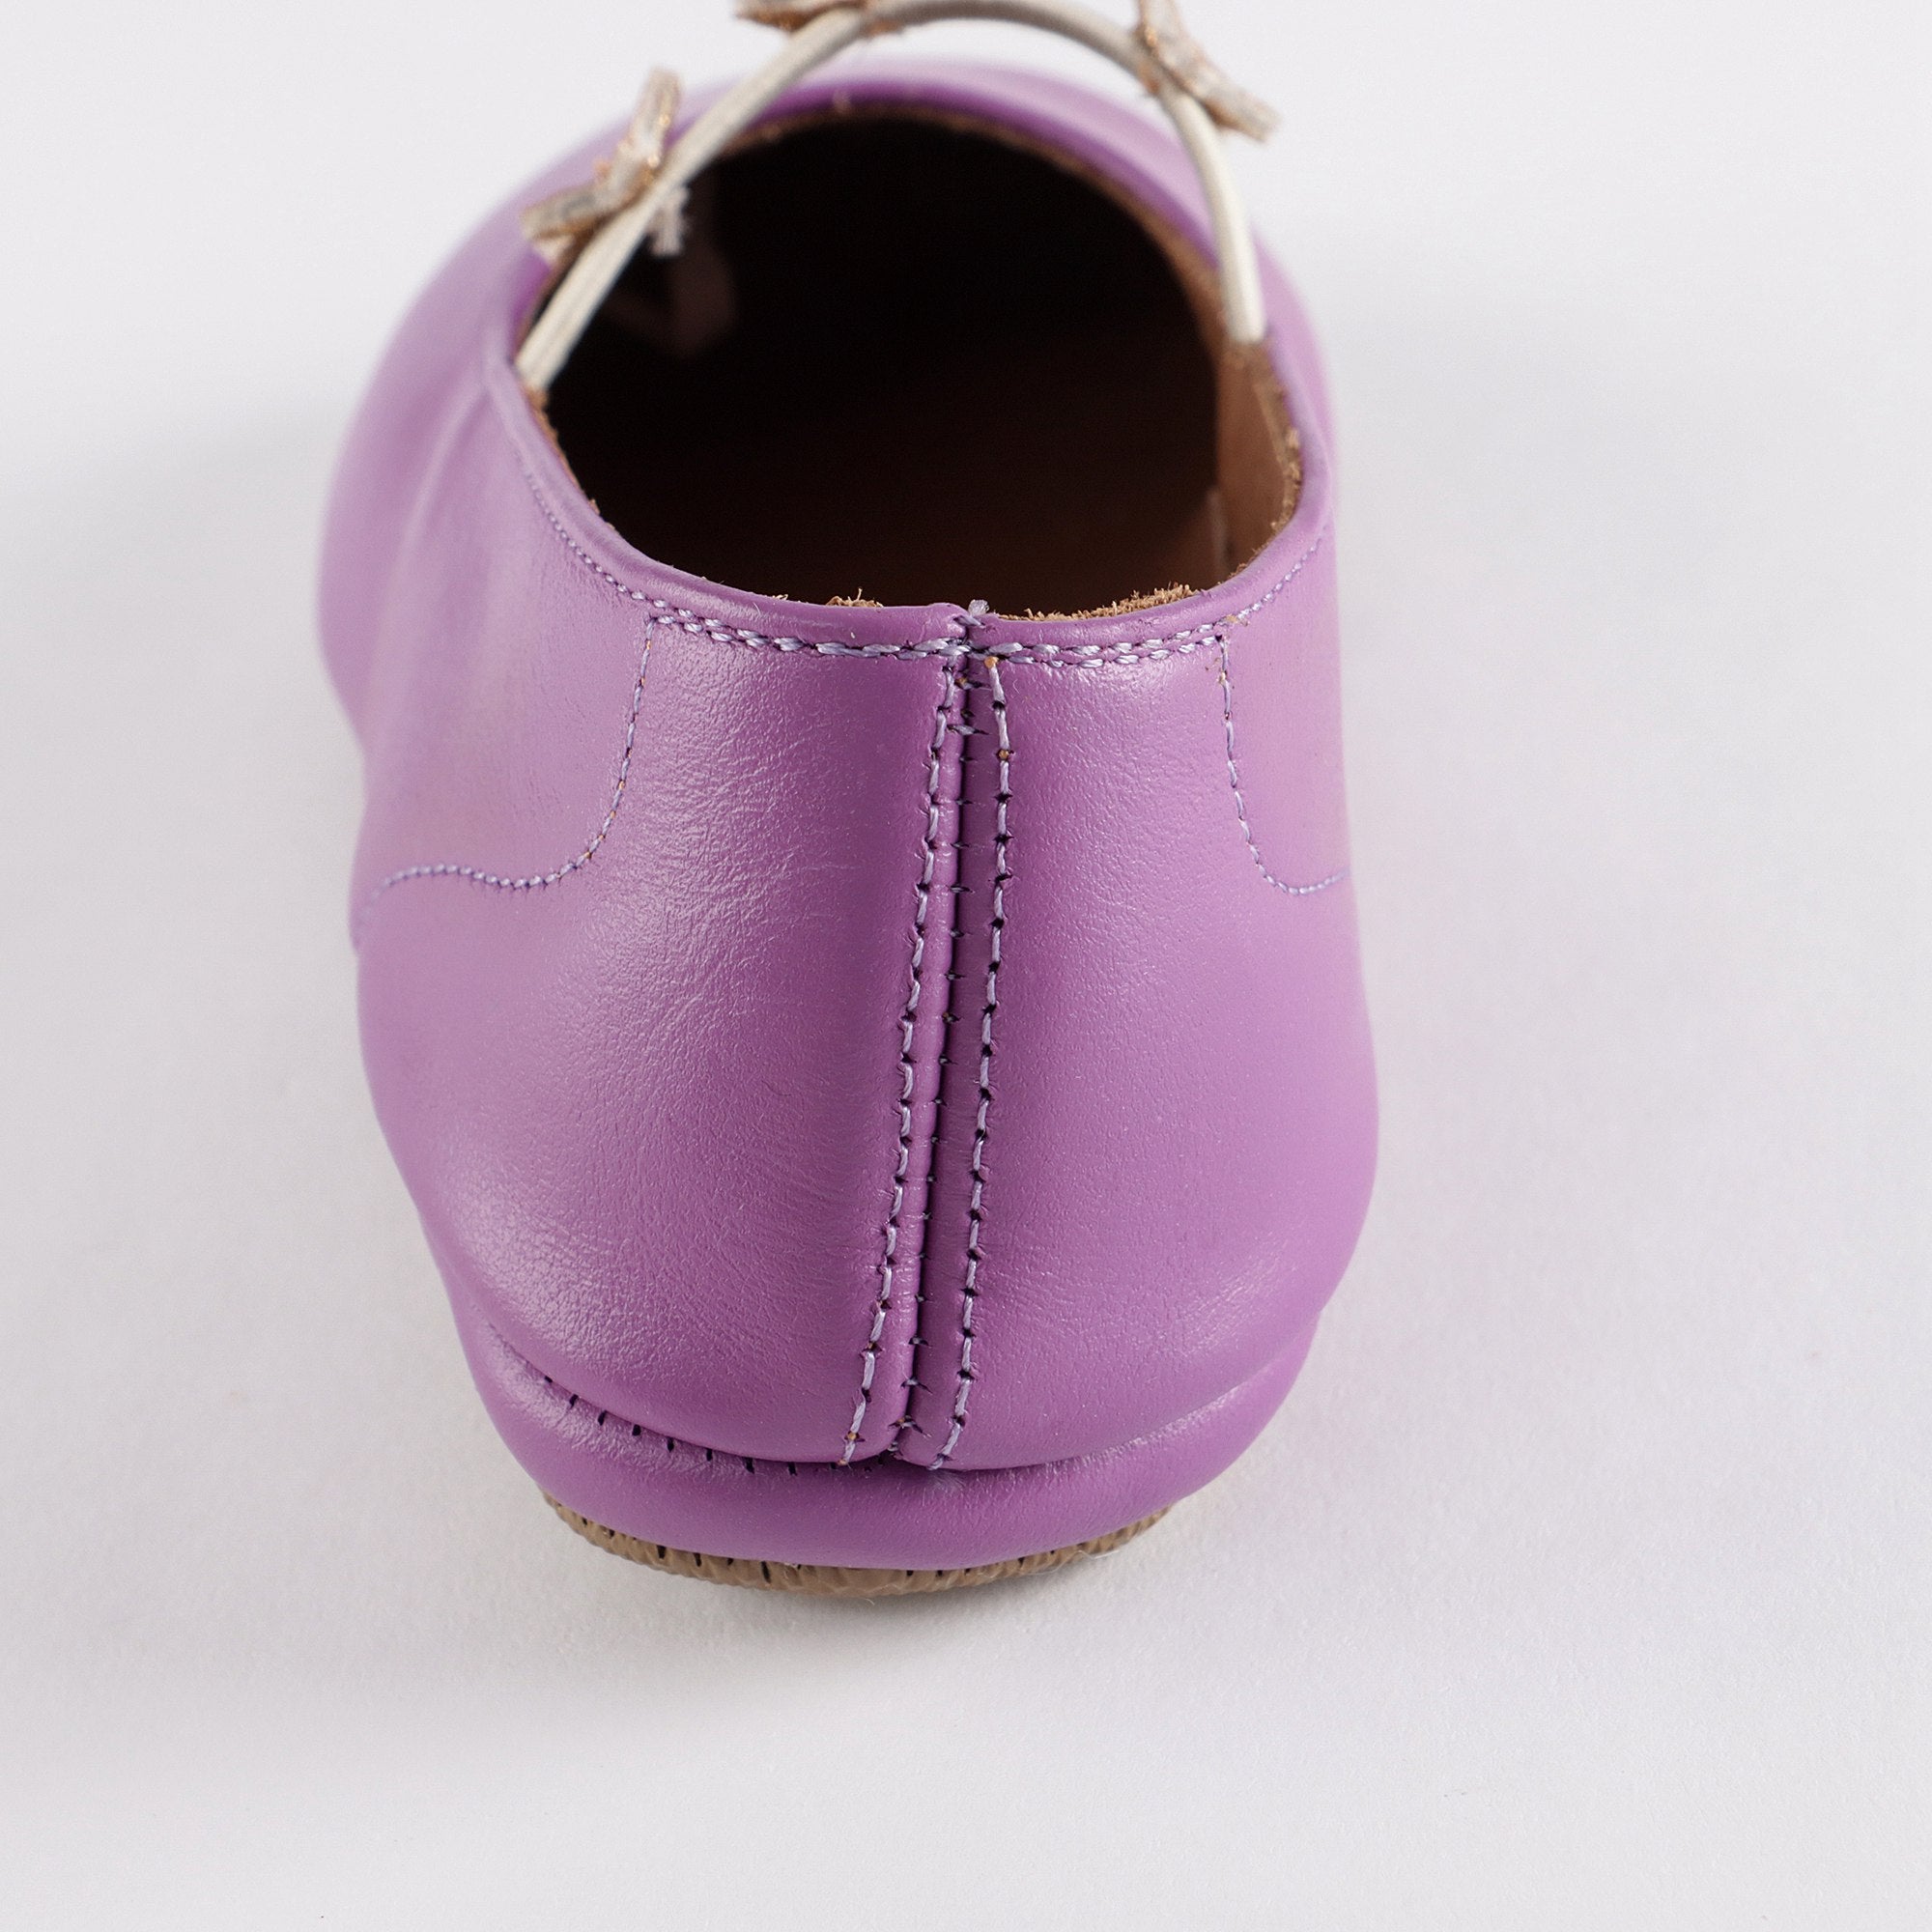 Girls Purple Stars Leather Shoes